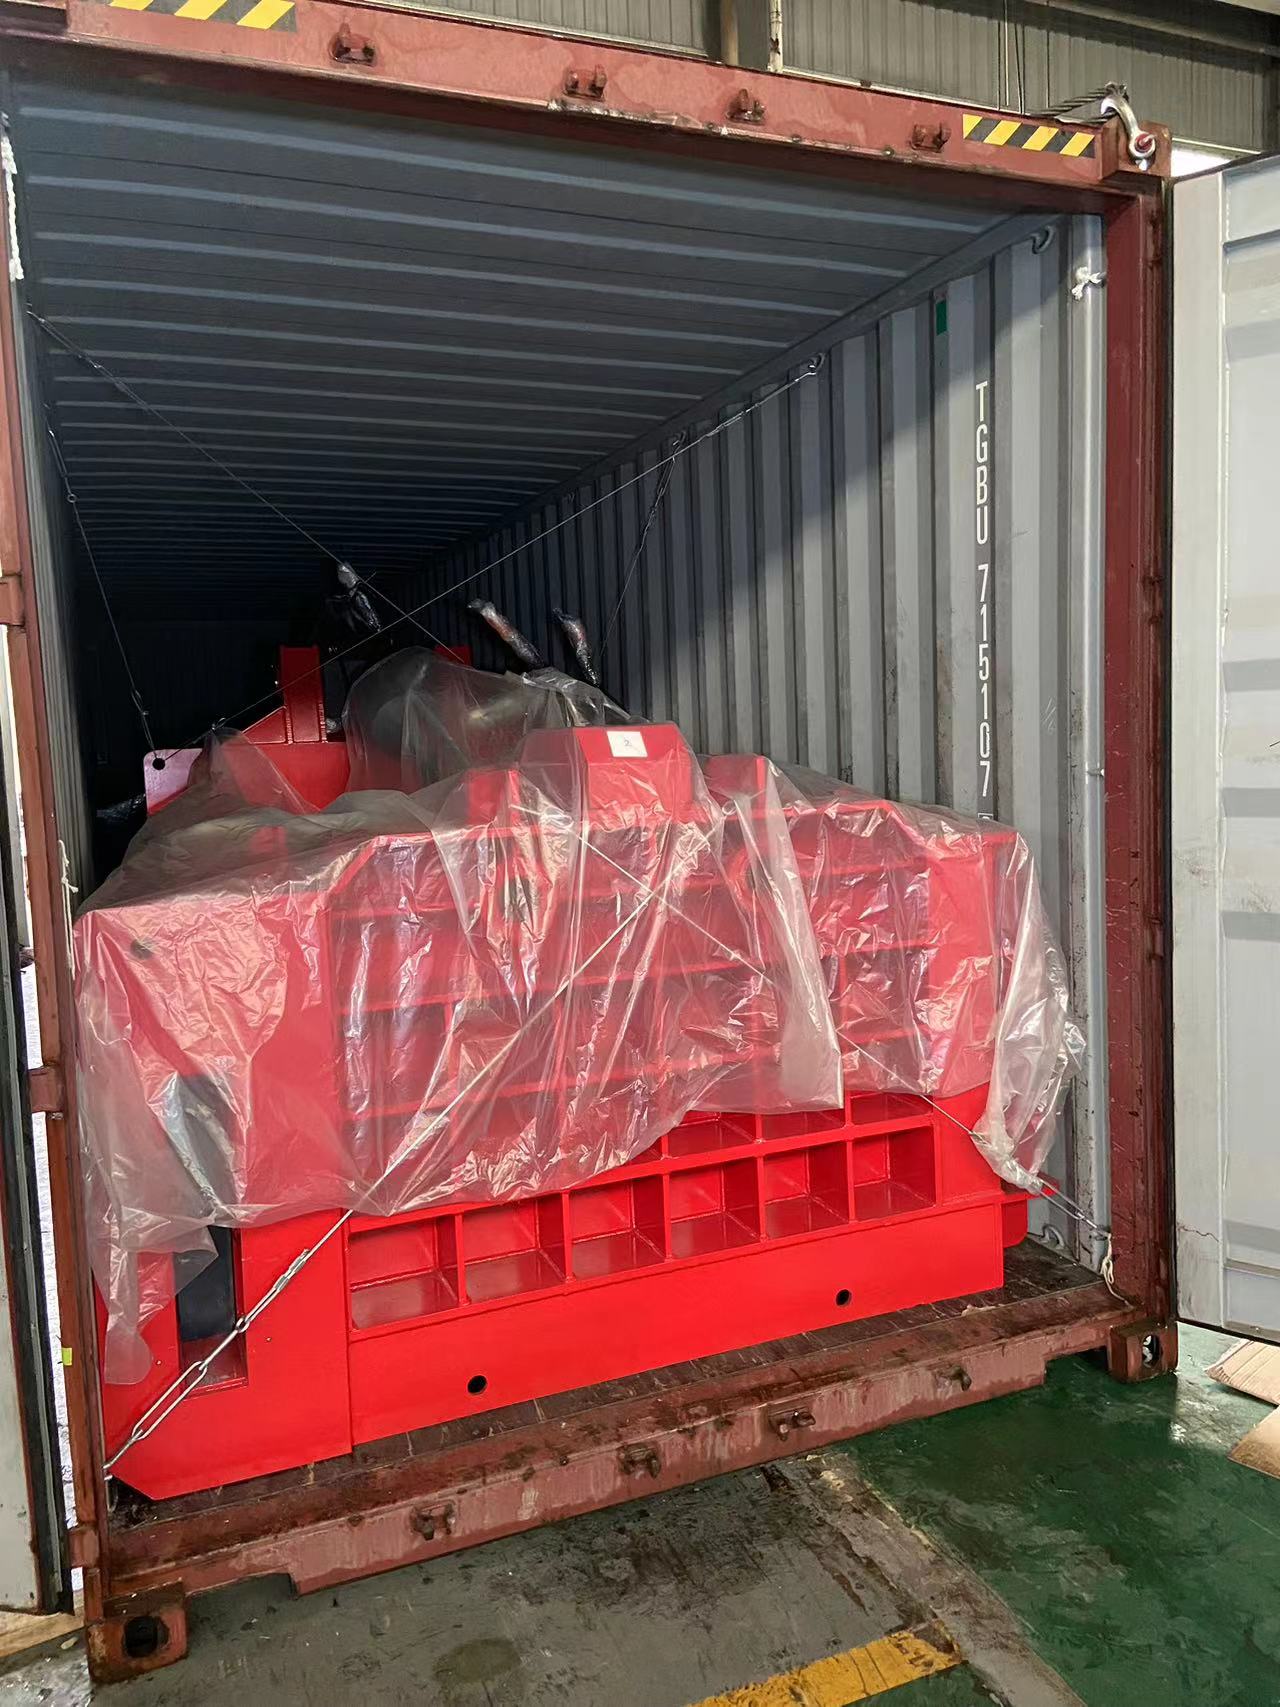 ENERPAT 3 SETS OF AMB-L2014-250T AUTO METAL BALER TO NORTH AMERICA，USED FOR CAR SHELLS